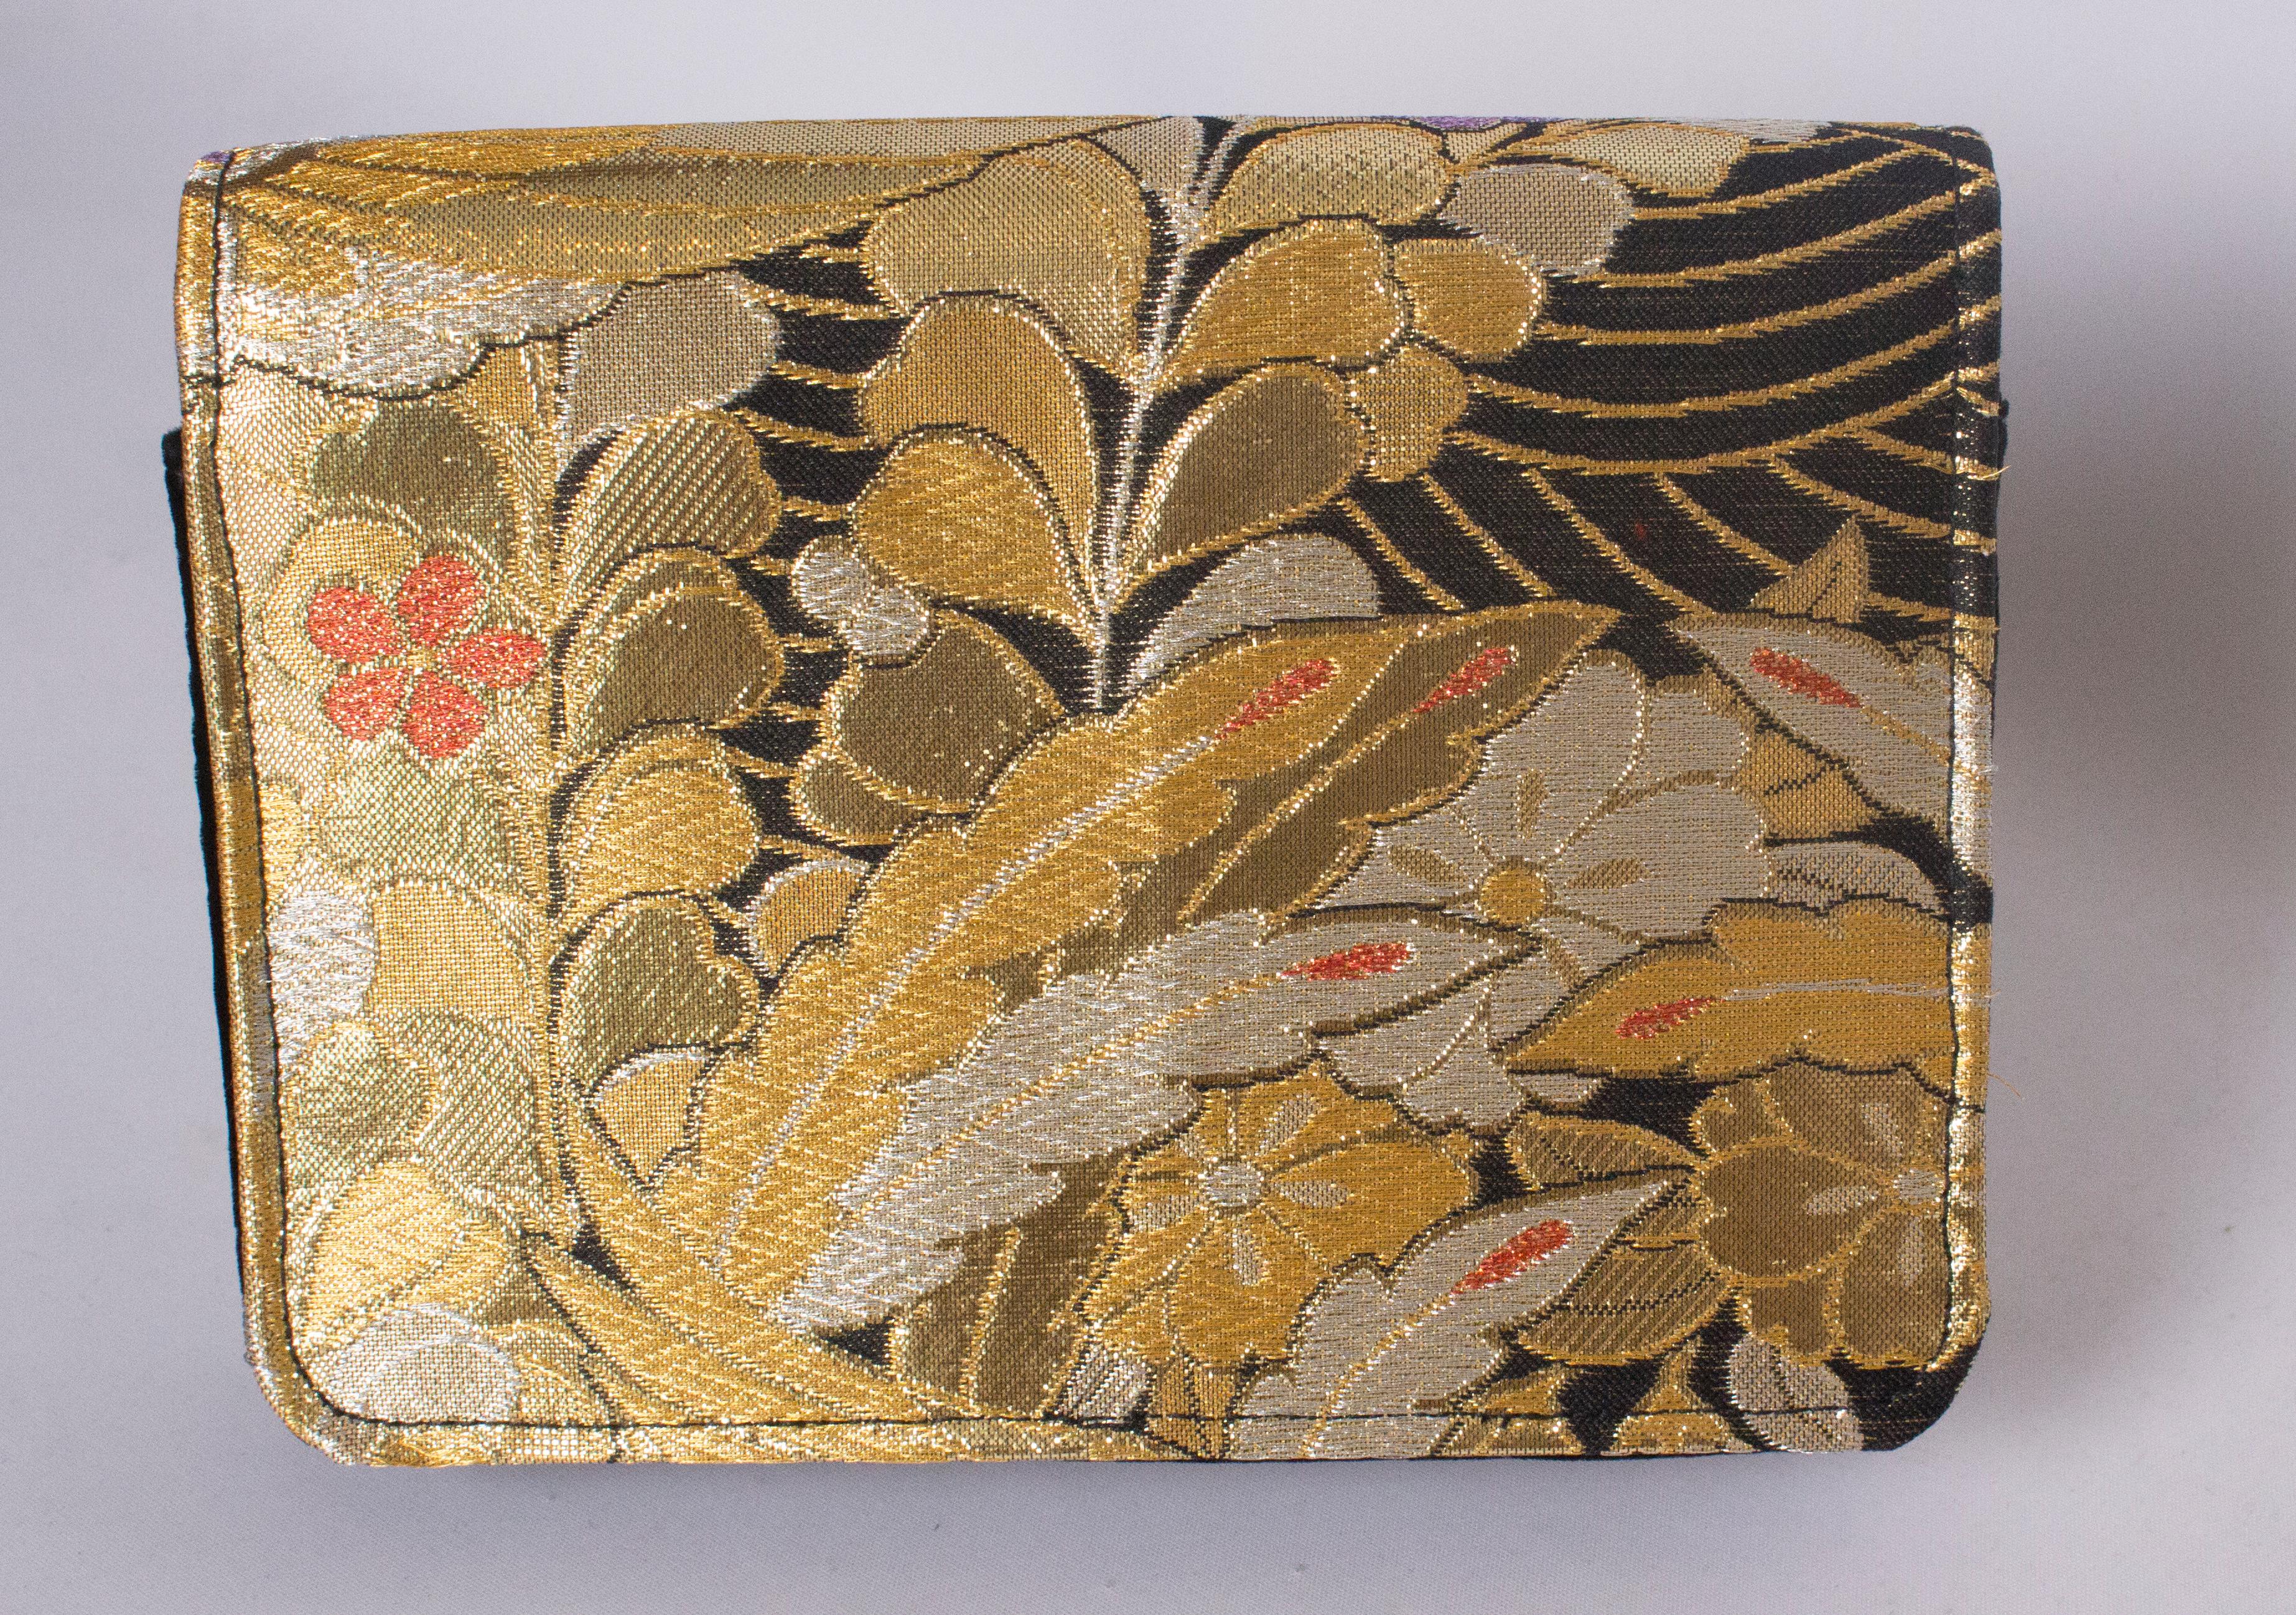 A chic bag by Mame Huku. The bag is made from vintage japanease silk textiles. This one is covered front and back in a gold , black, silver, red and lilac design. It has a fold over flap opening, and has a magnetic fastening. The bag is lined in